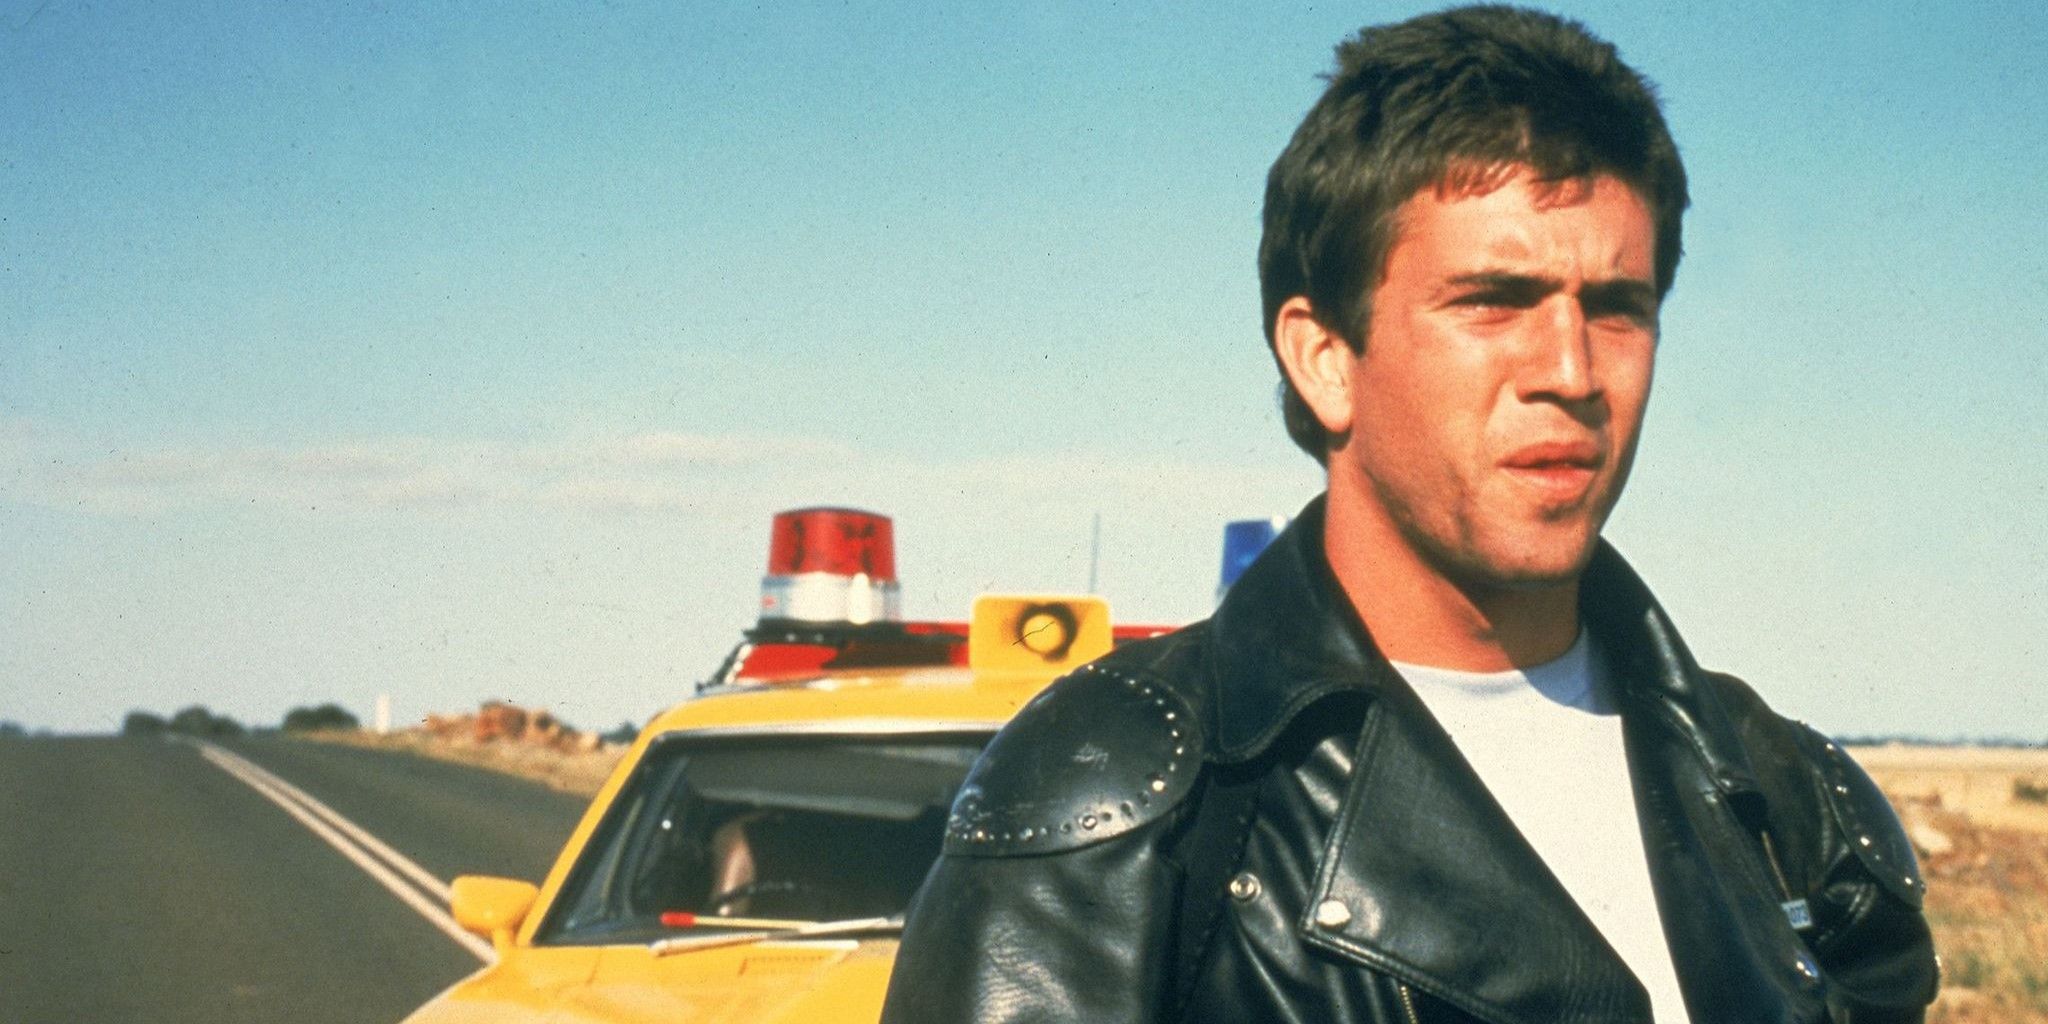 Mel Gibson in a black leather jacket and white tee standing behind his yellow police car.